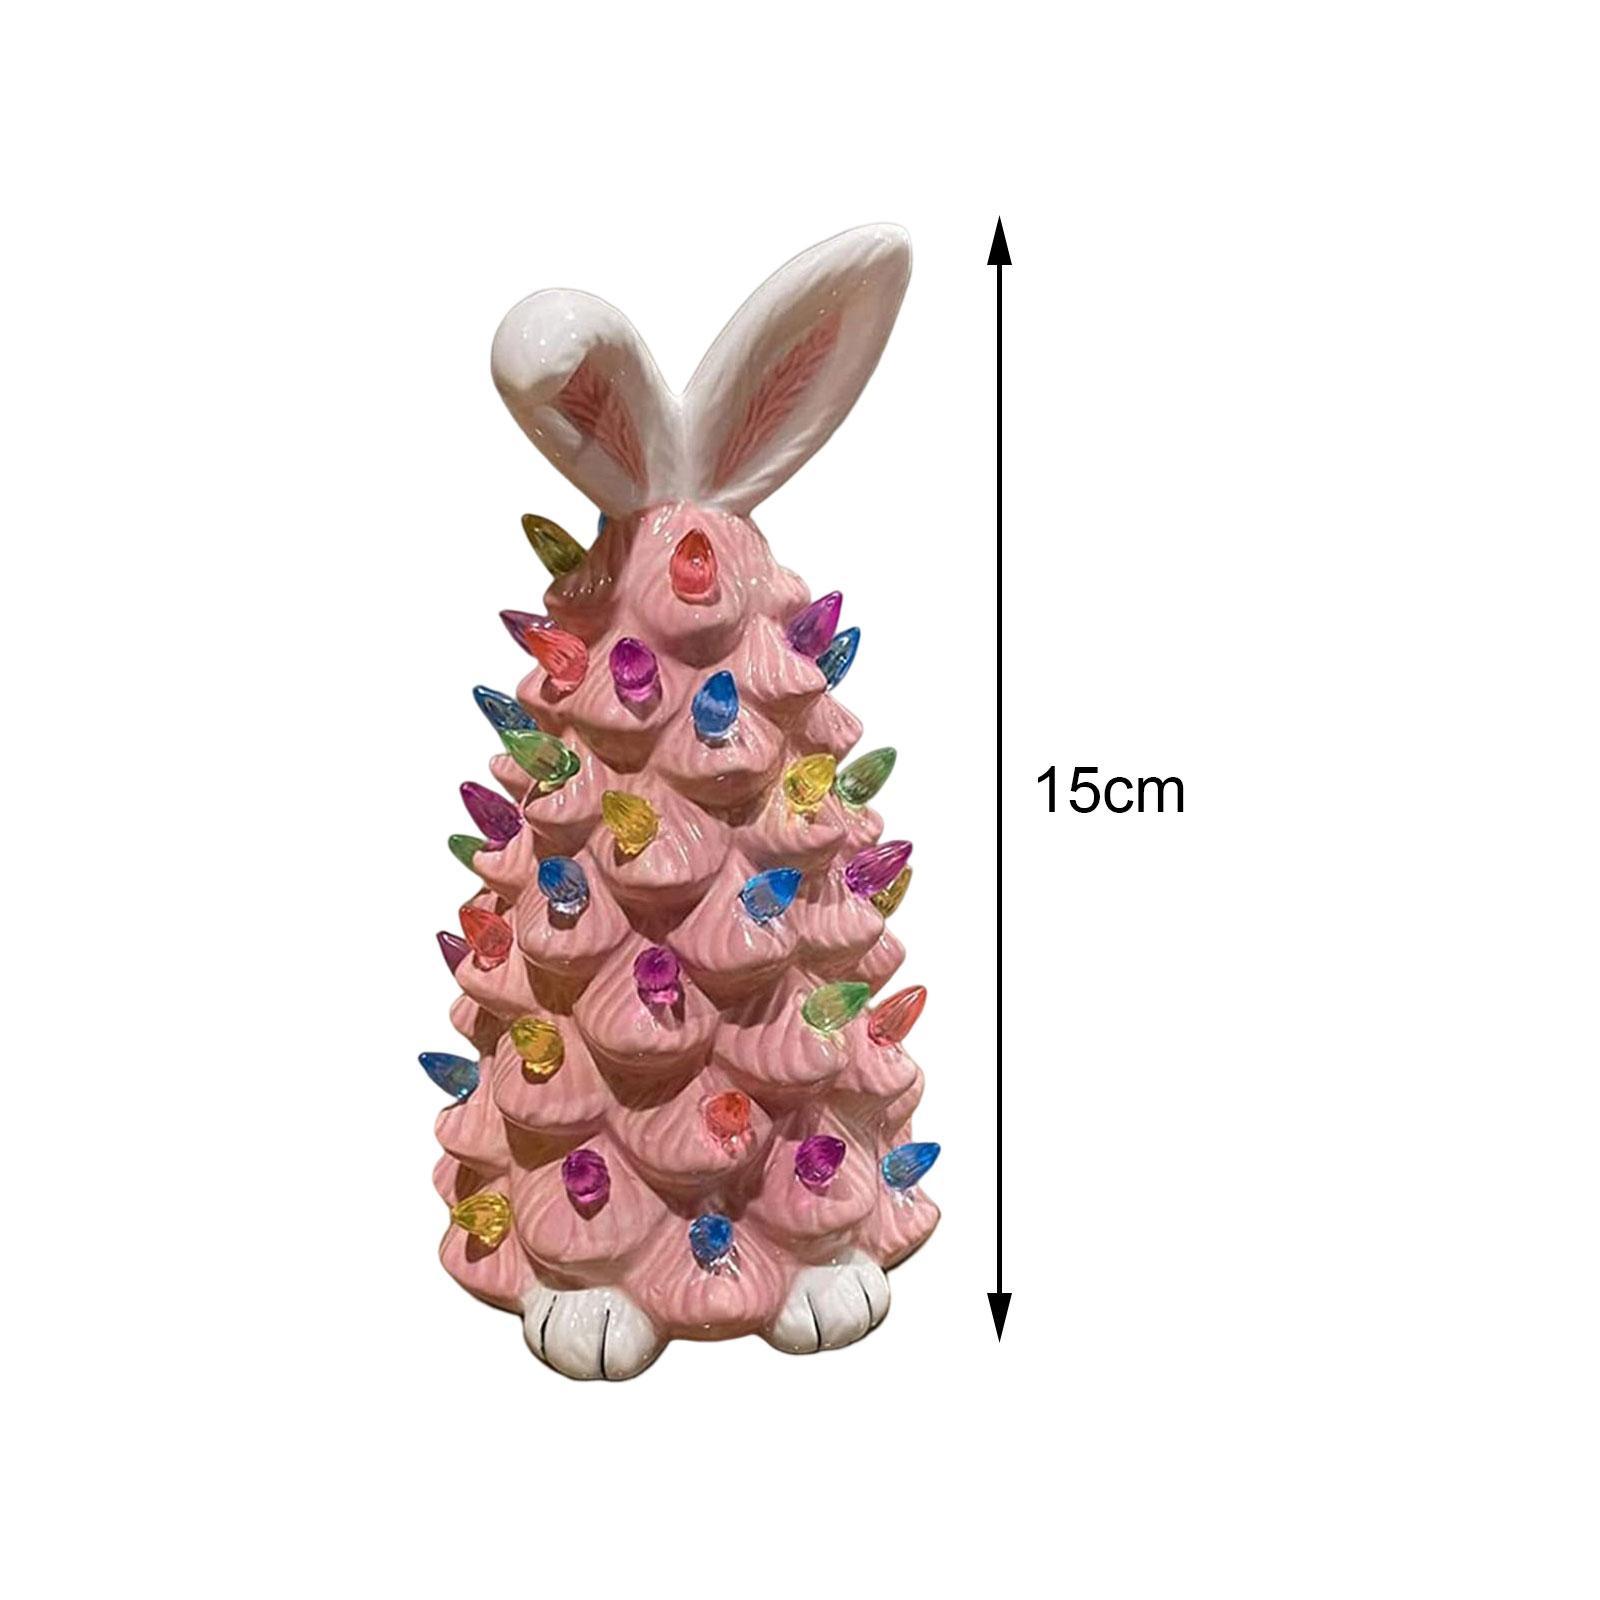 Easter Bunny Statue Ornaments Animal Figures for Home Shelf Decoration